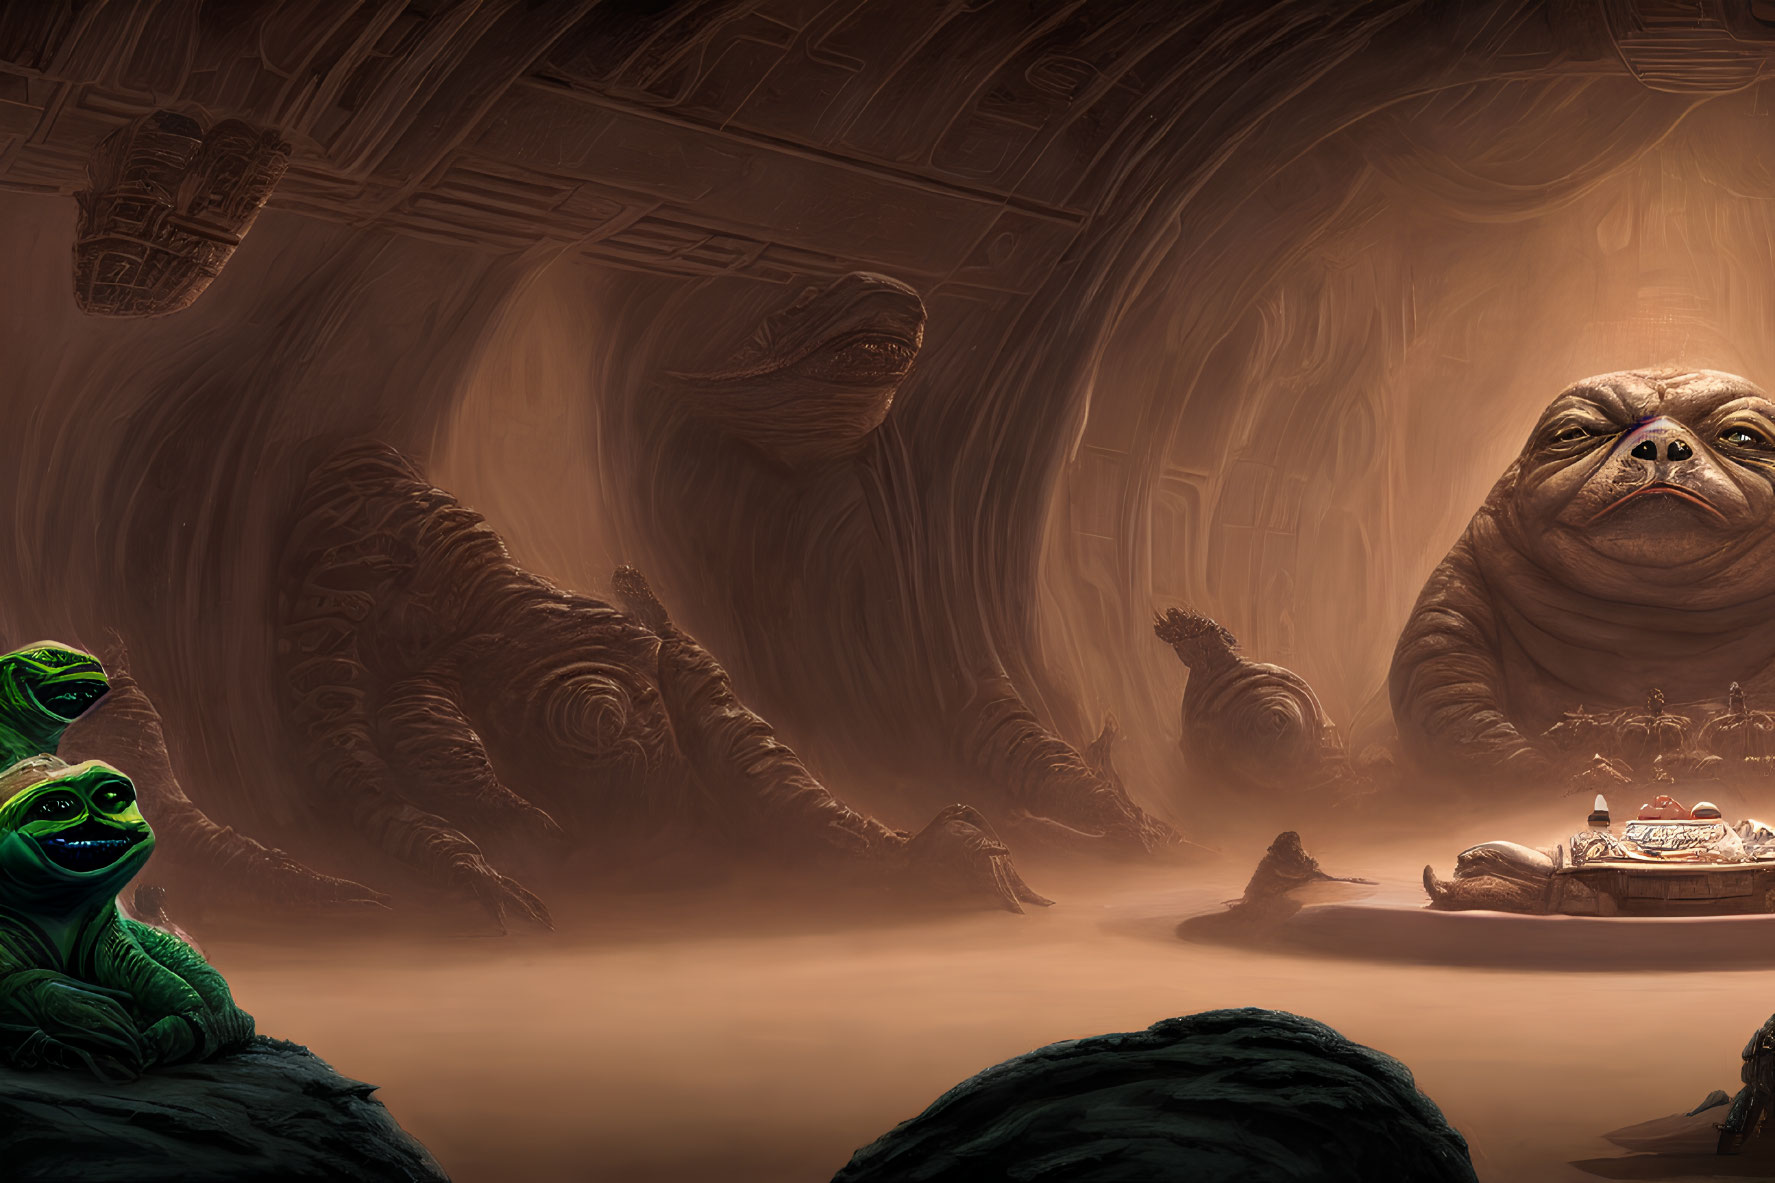 Surreal artwork featuring oversized slug-like creatures, green beings, and floating platforms in a cavernous